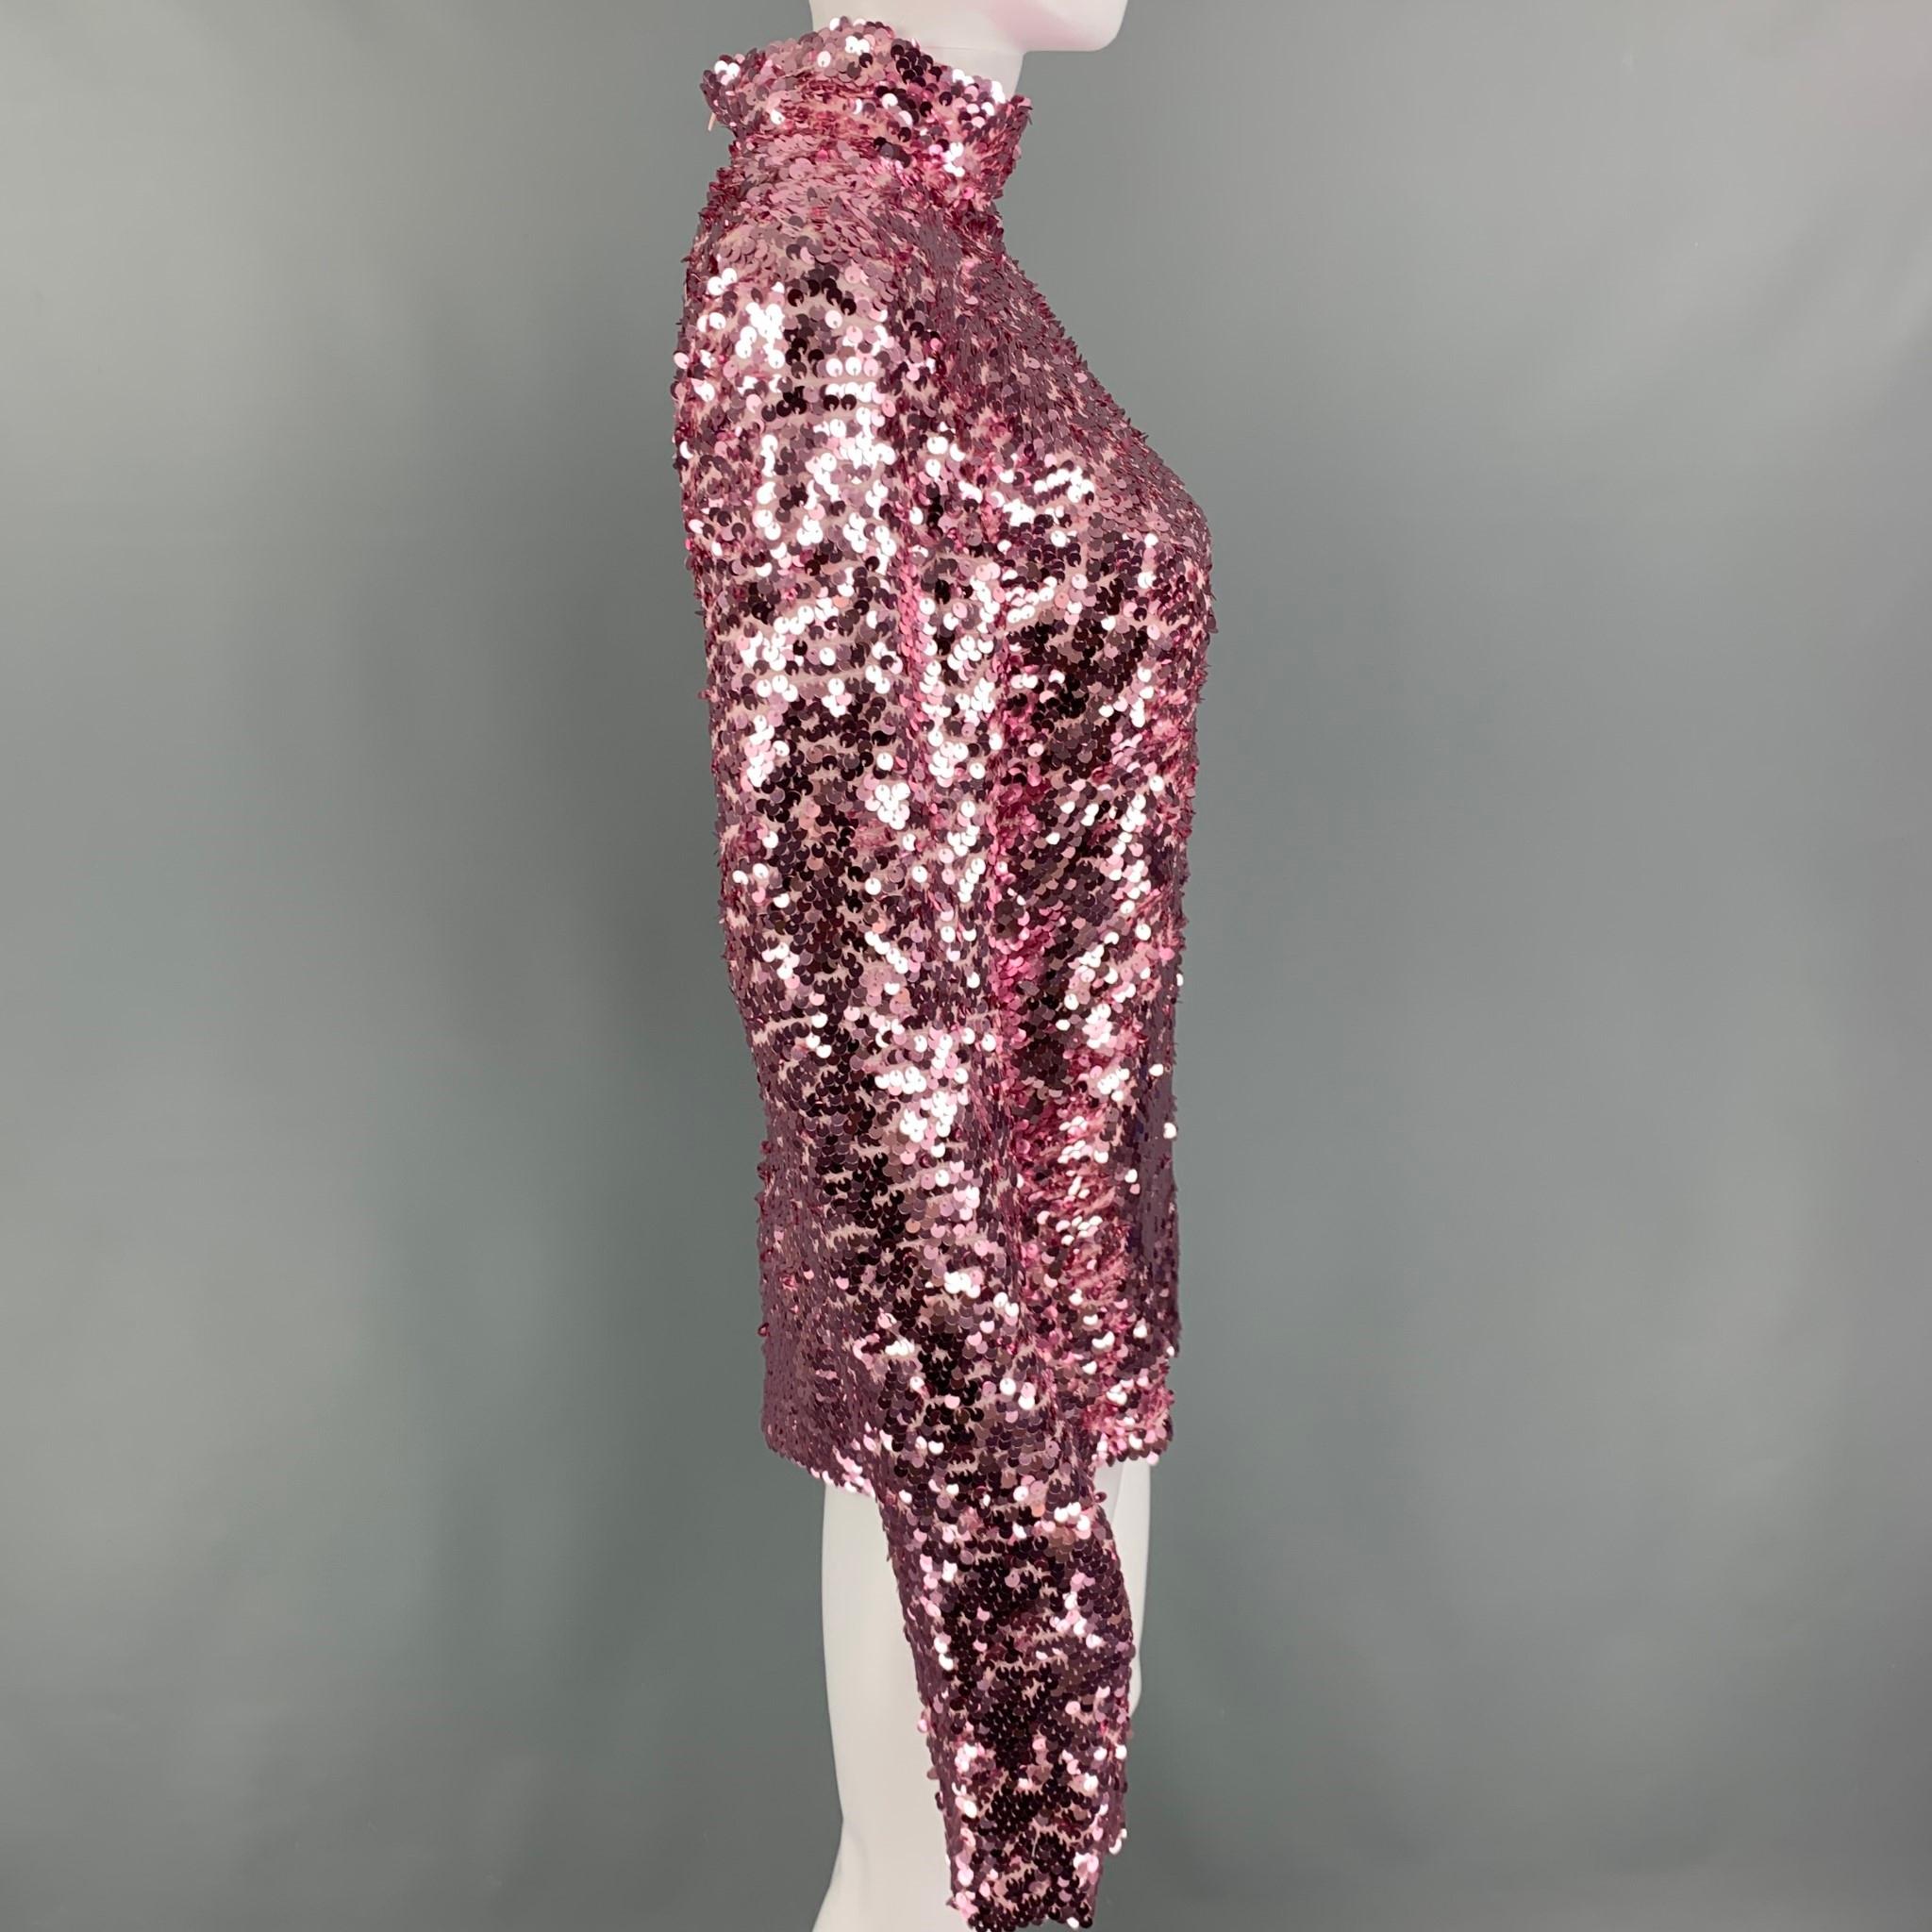 MSGM dress top comes in a pink sequined viscose featuring a high collar, long sleeve, and a back zip up closure. 

Excellent Pre-Owned Condition.
Marked: 42

Measurements:

Shoulder: 16 in.
Bust: 36 in.
Sleeve: 28 in.
Length: 24 in.